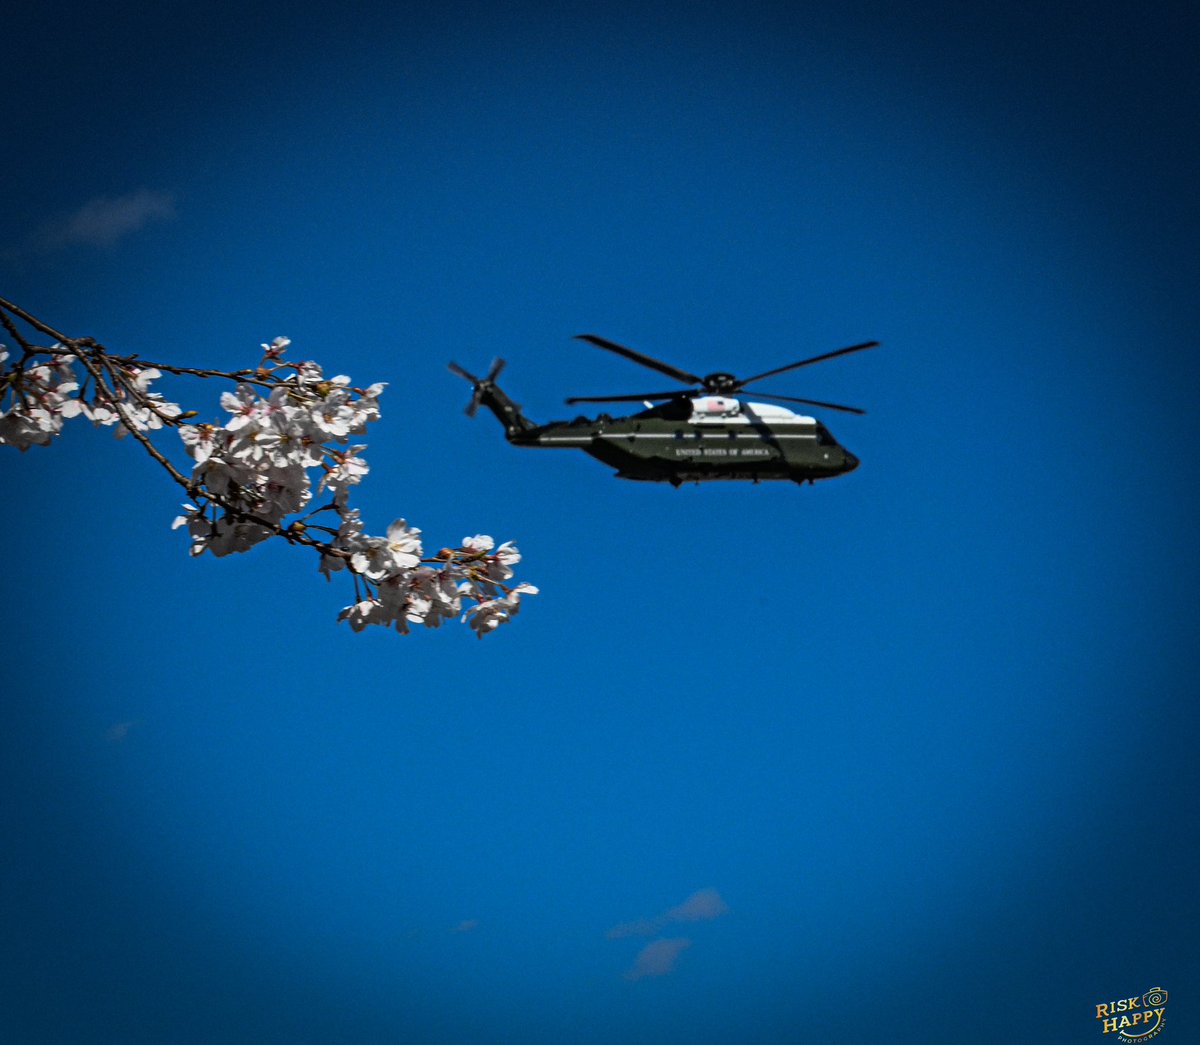 Not sure the call sign of president is not on board @USMC flying by the tidal basin with cherry blossoms below